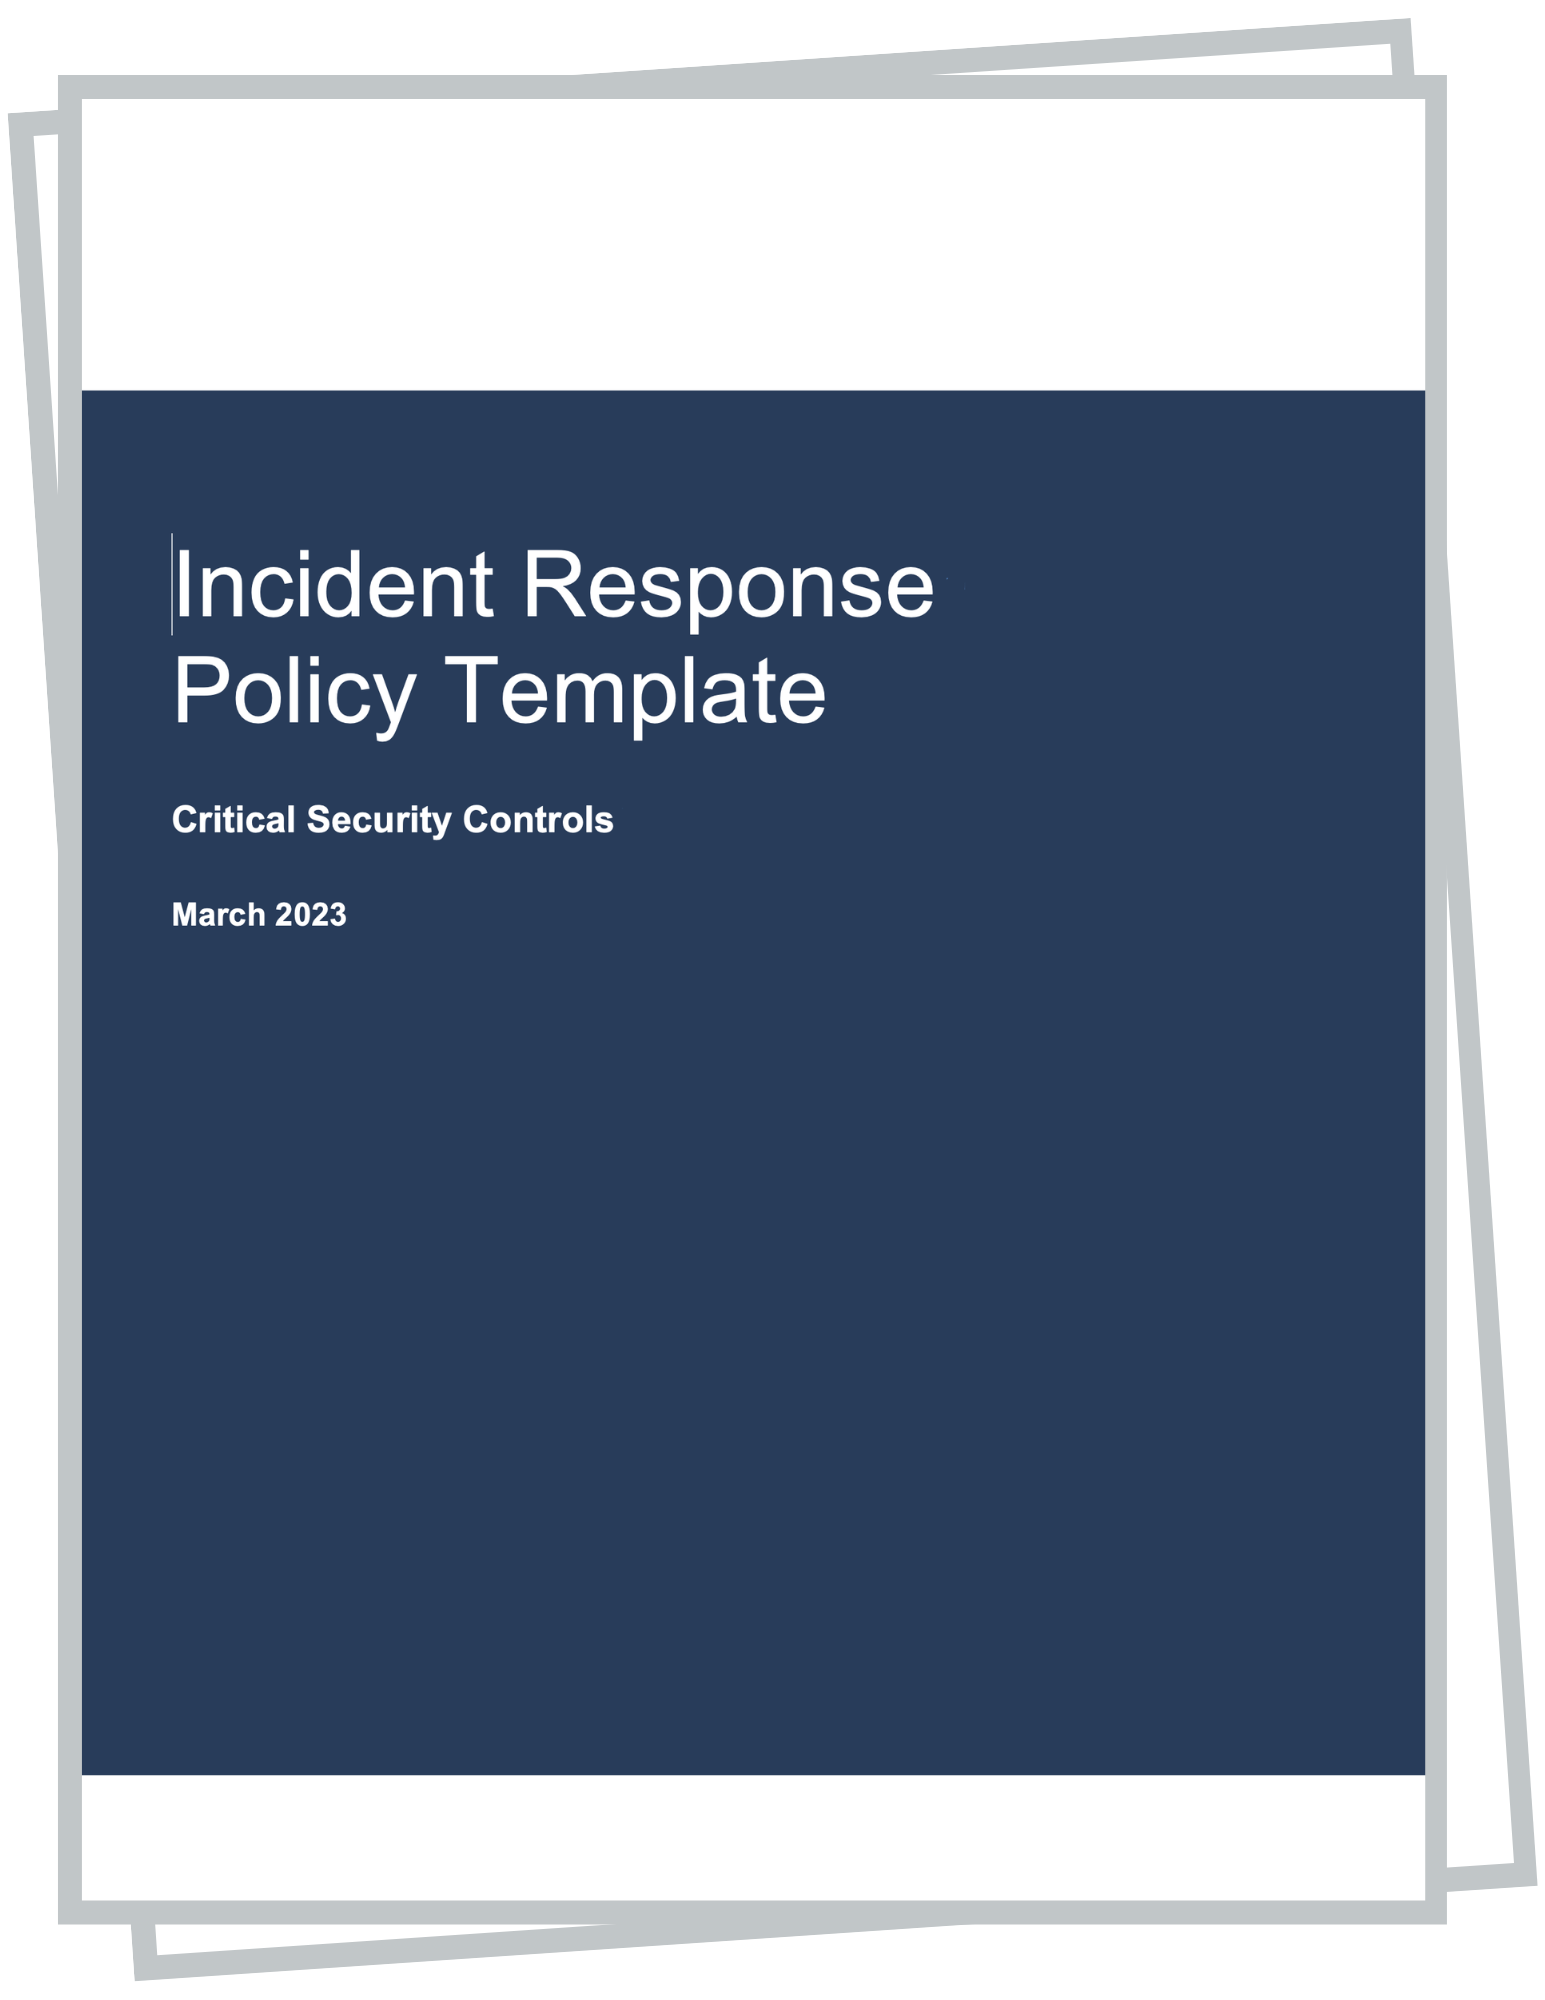 Incident Response Policy Template for CIS Control 17